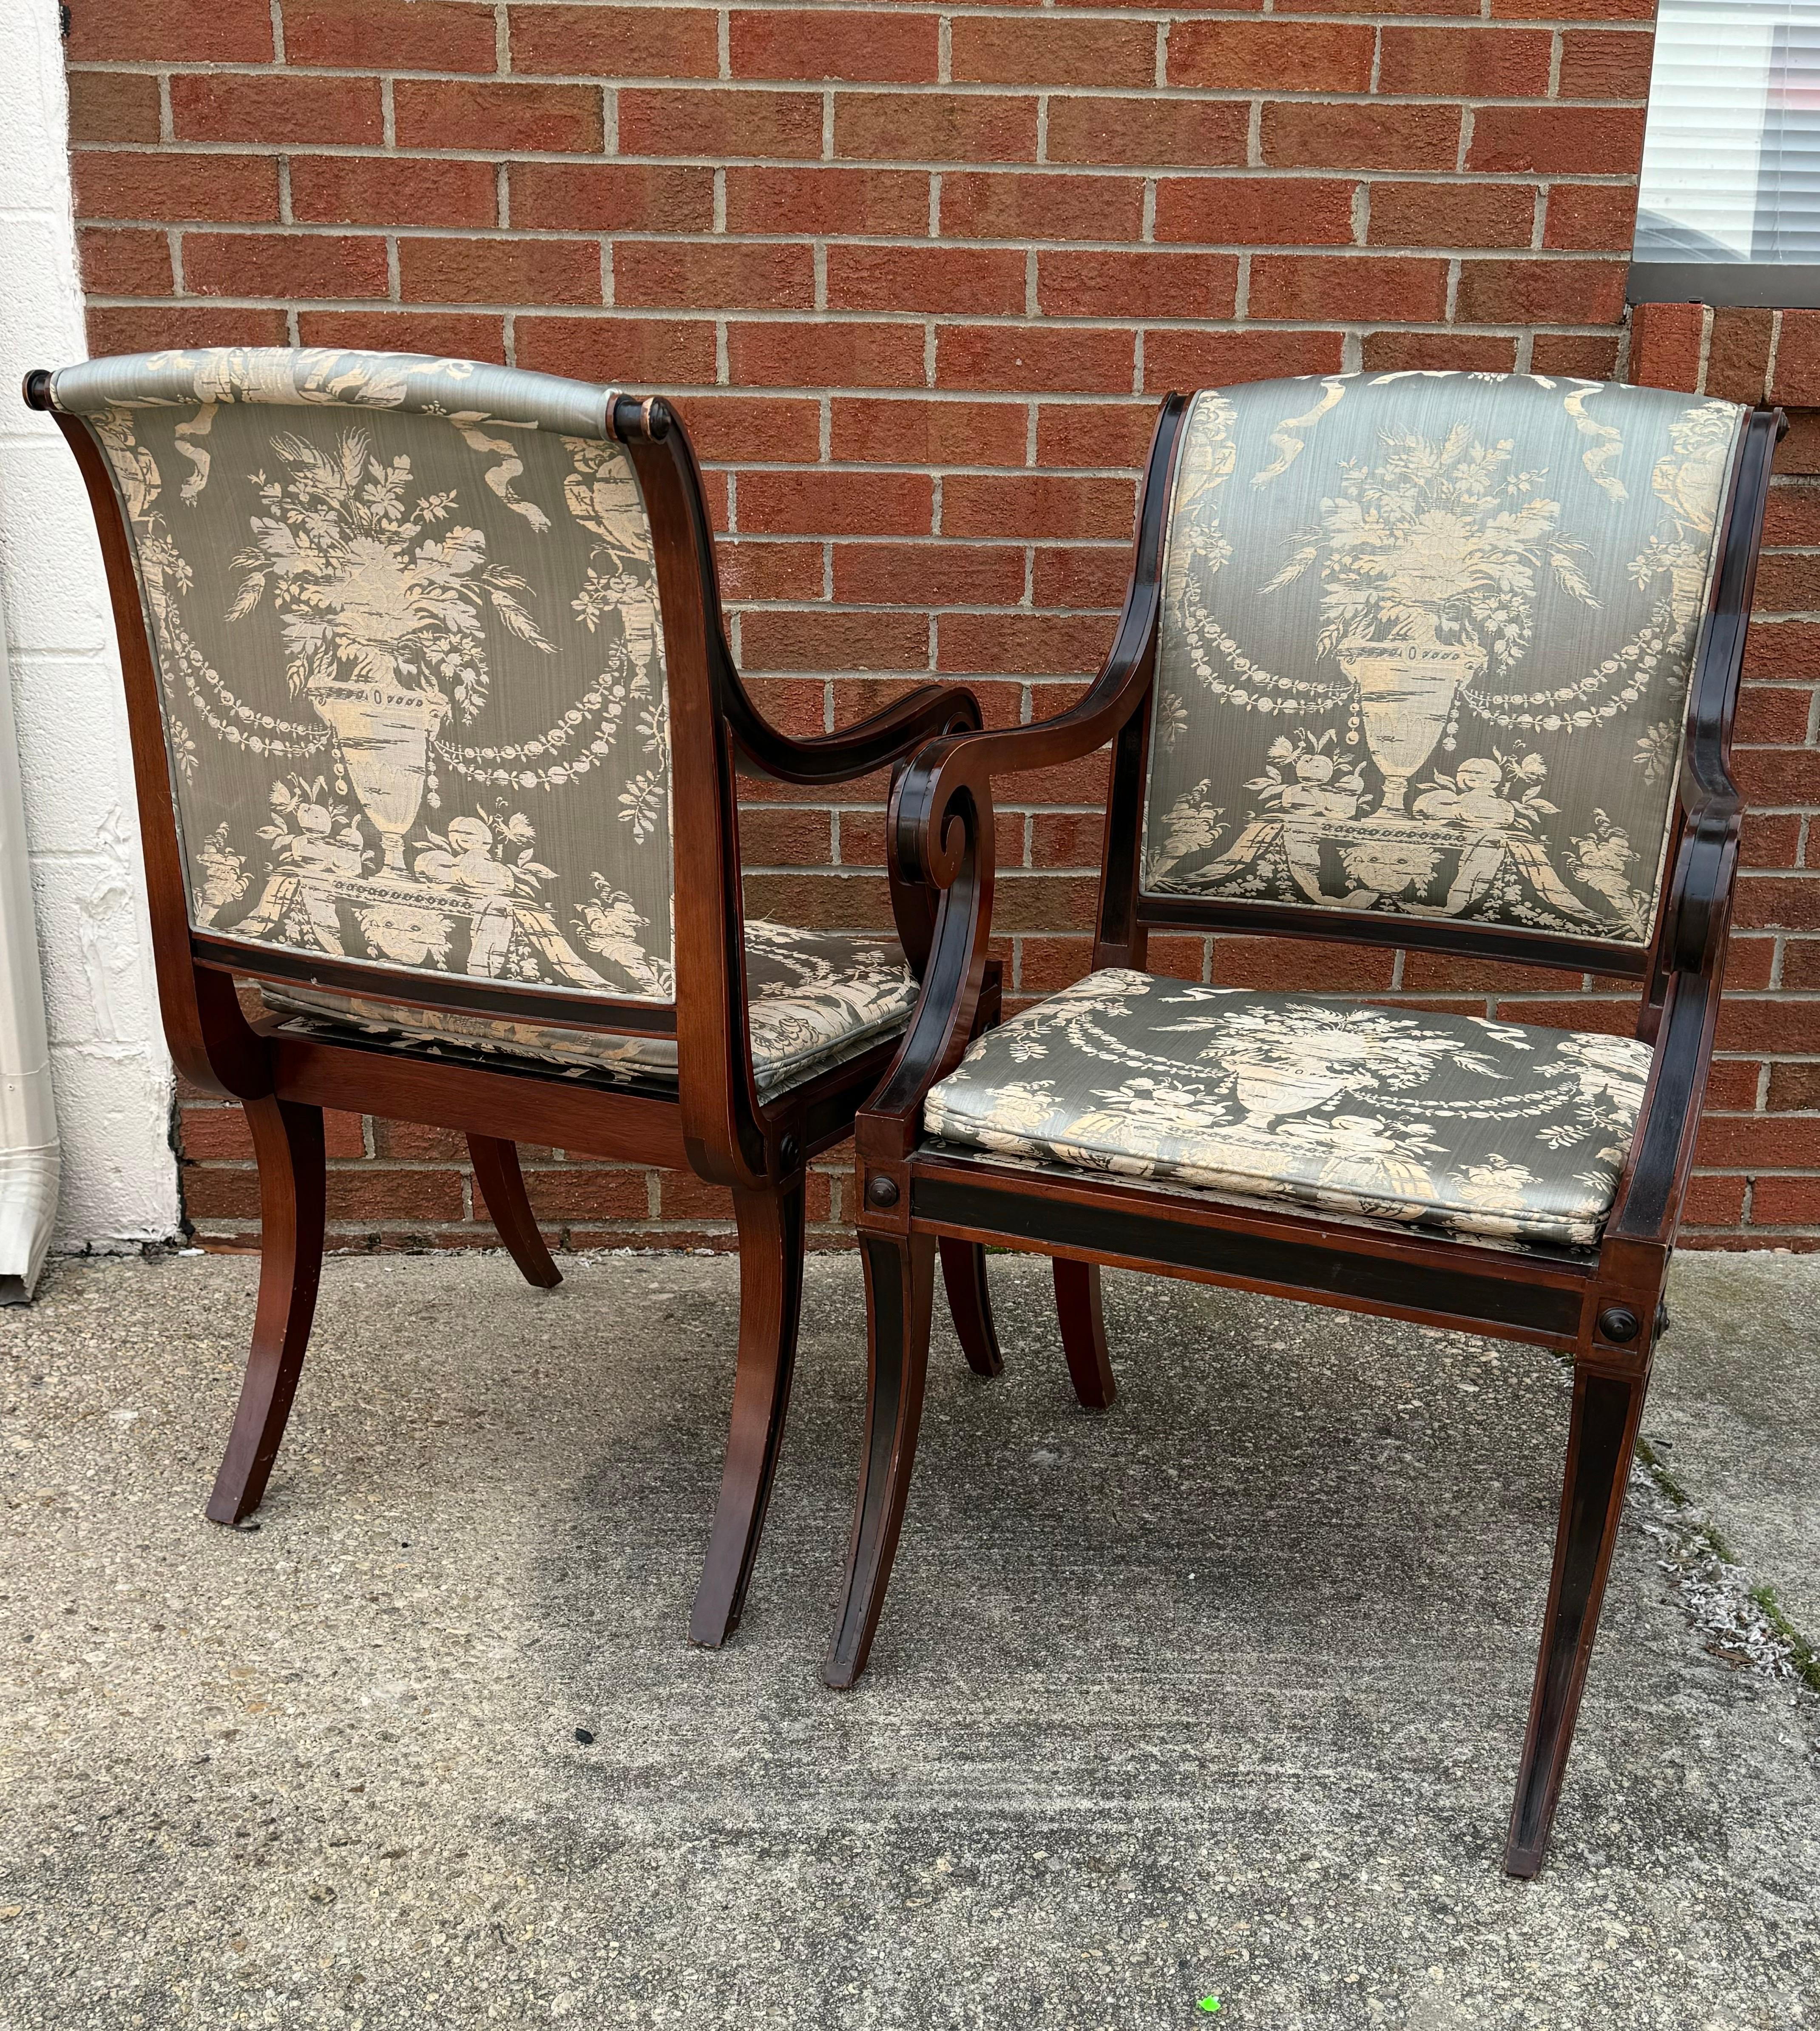 Pair of  regency style arm chairs by Baker furniture, circa 1960s. The British regency period was most notably influenced by the exotic Greek, Egyptian and Asian furniture to which visitors at London’s new public museums had begun marveling.